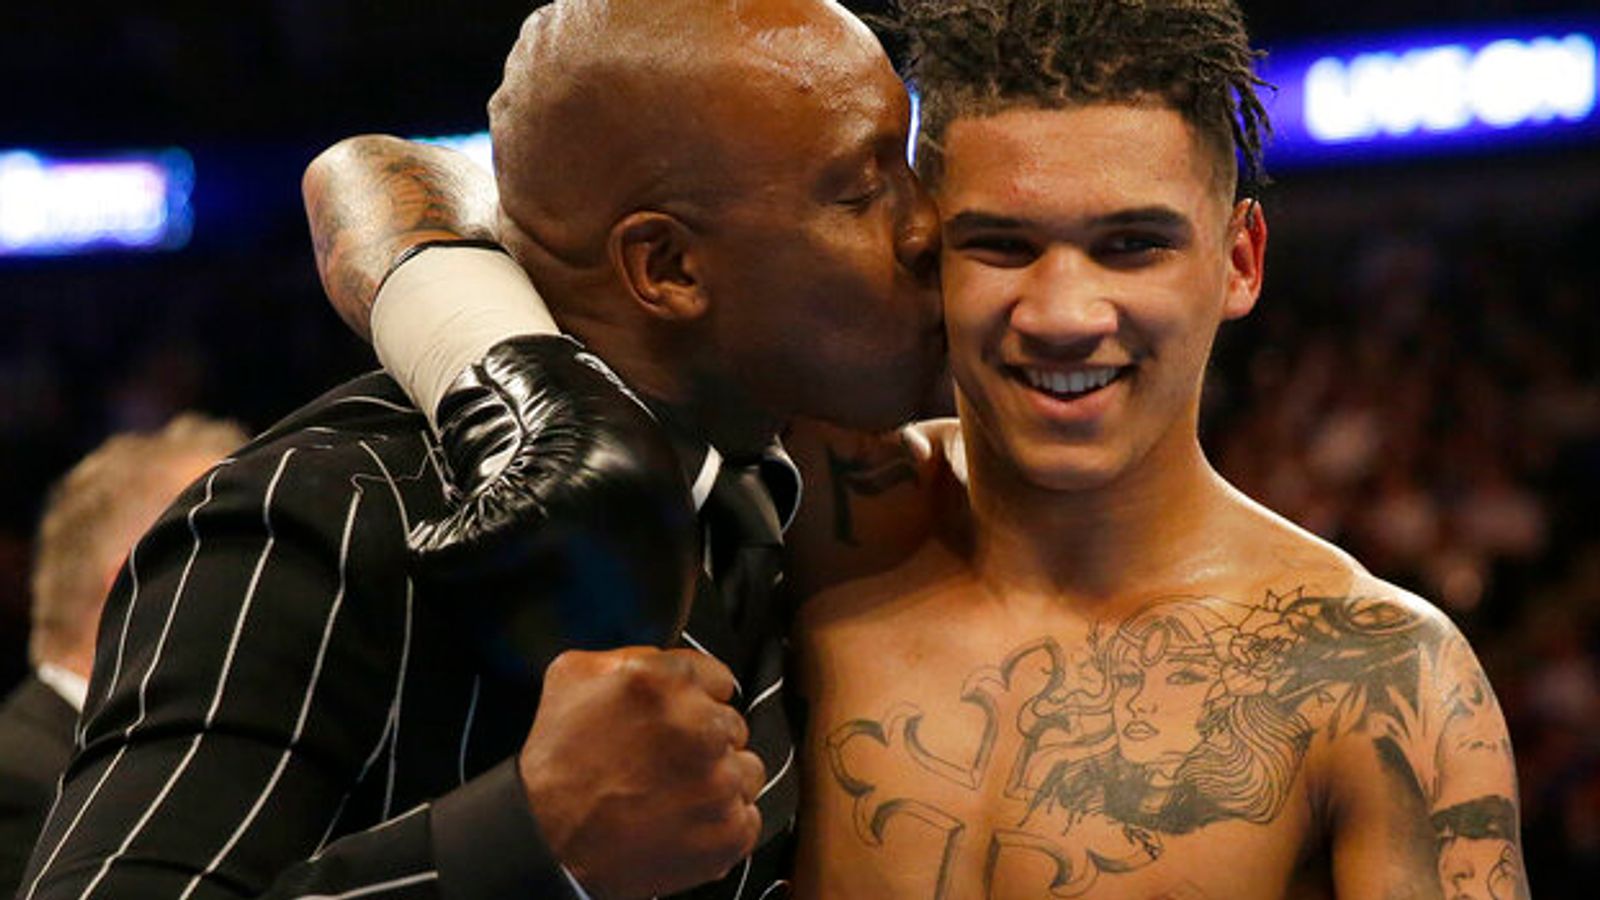 Nigel Benn My son Conor Benn is a clean athlete; Were in total shock fight vs Chris Eubank Jr was called off Boxing News Sky Sports